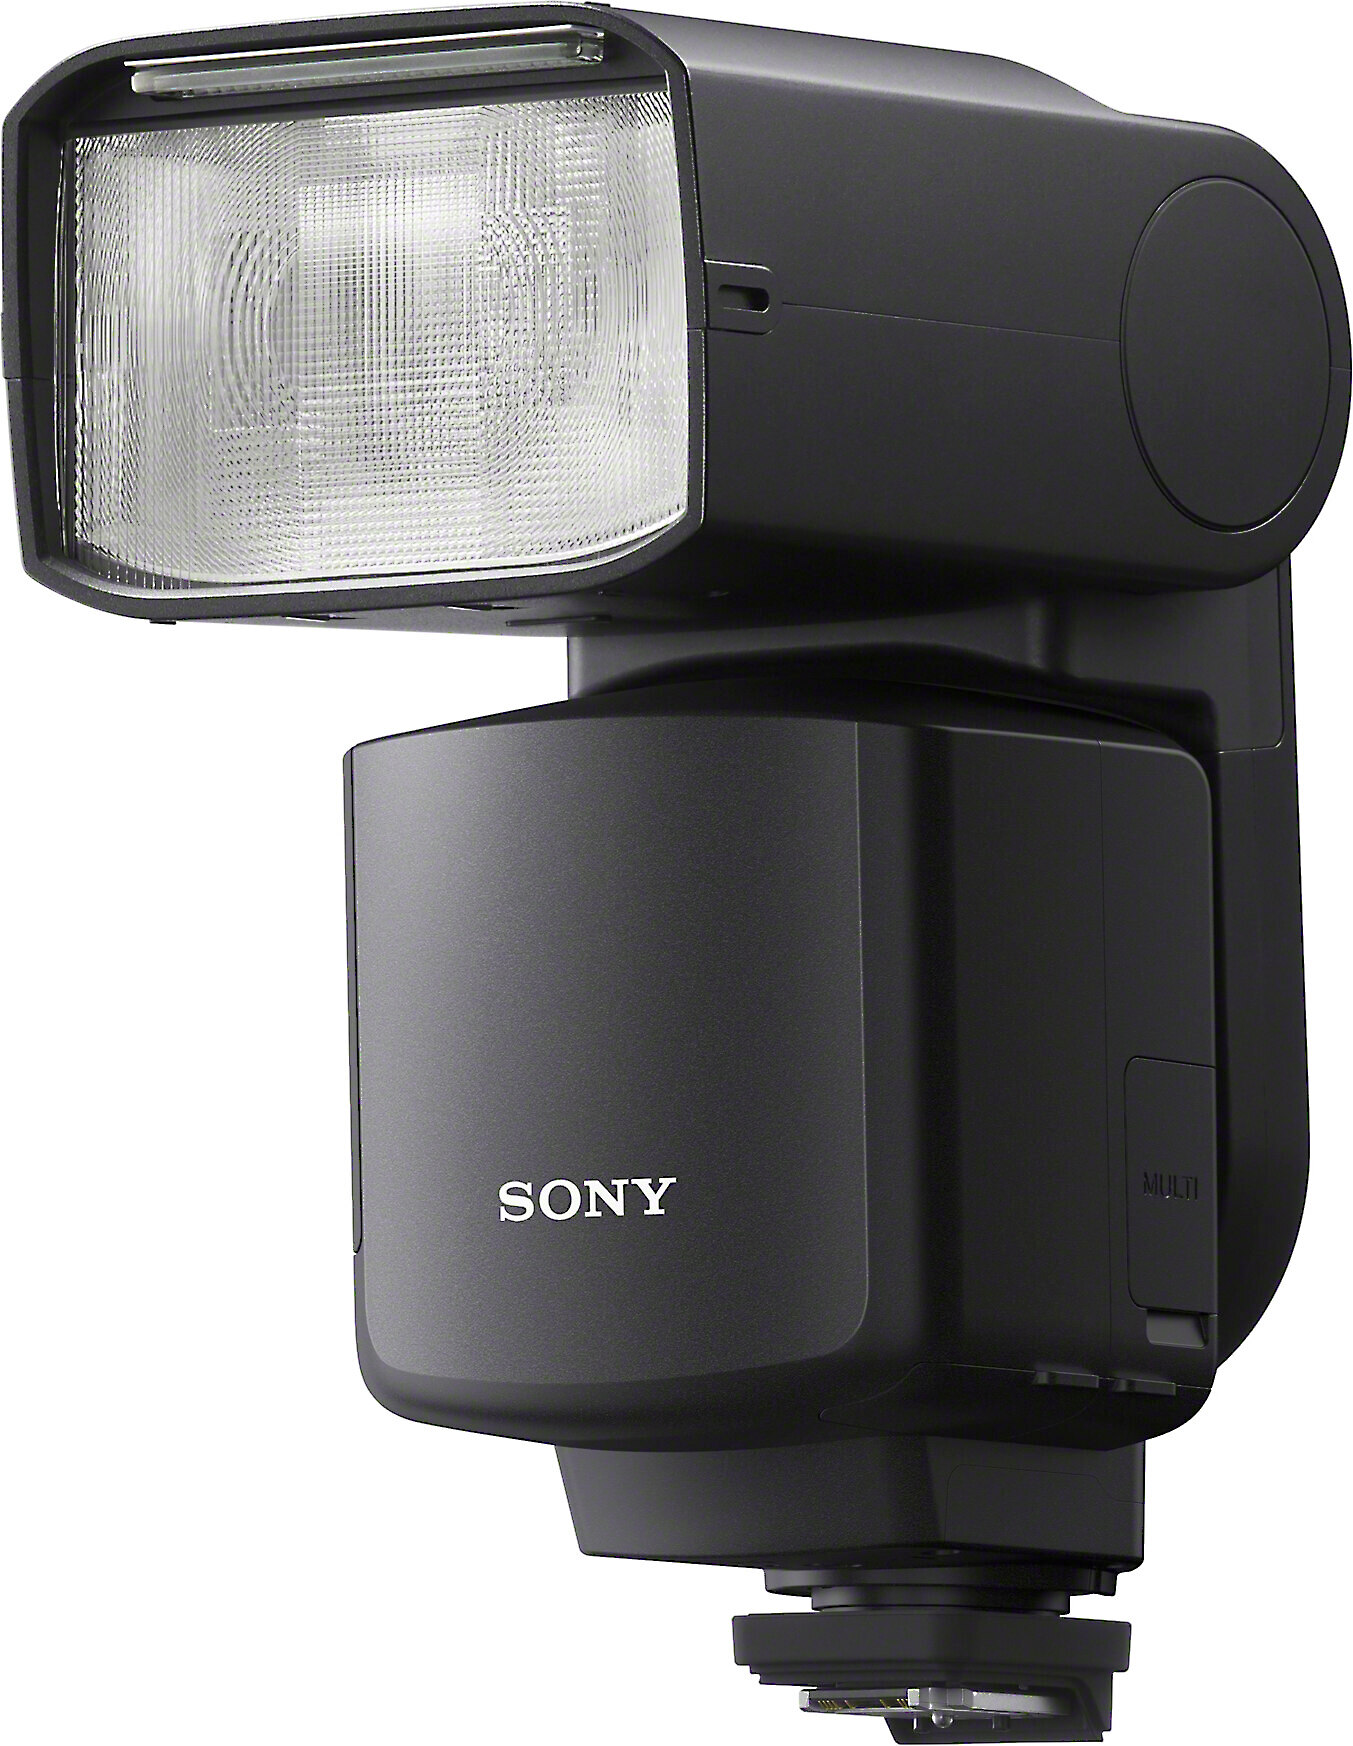 Customer Reviews: Sony HVL-F60RM2 Compact flash with wireless radio  control, for Sony Alpha cameras (GN60) at Crutchfield